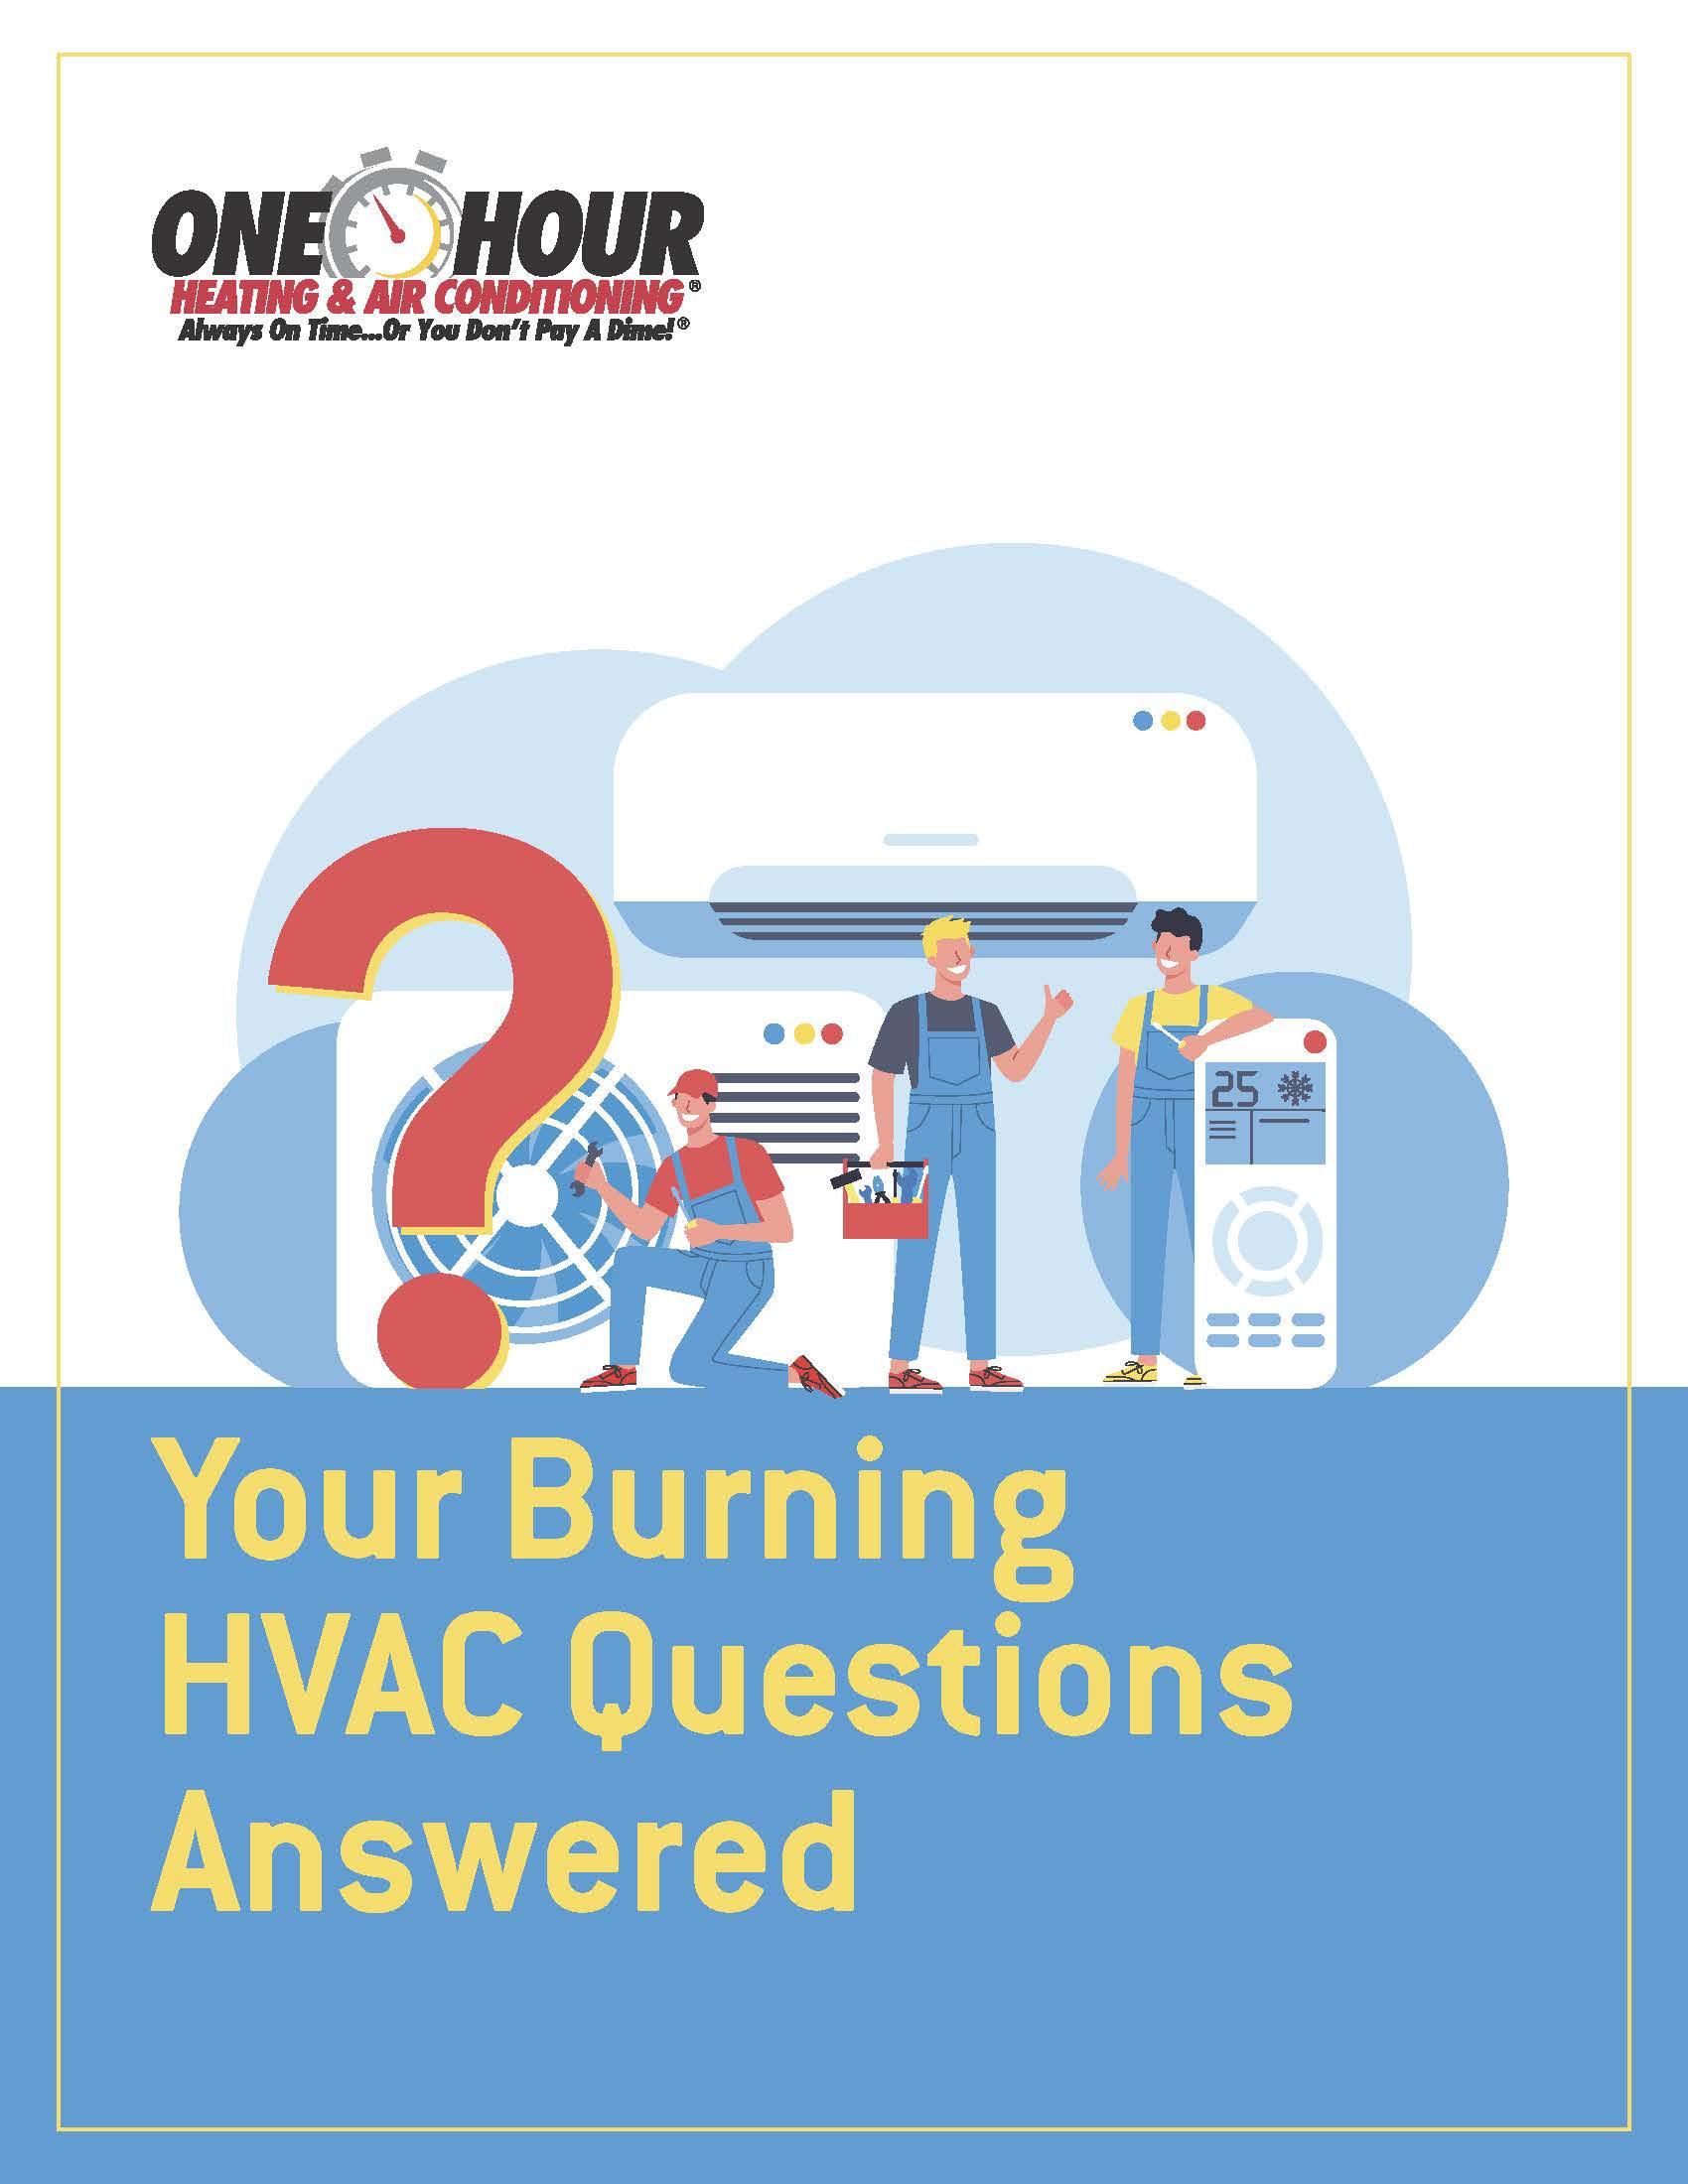 Your HVAC Questions Answered cover photo for informational PDF